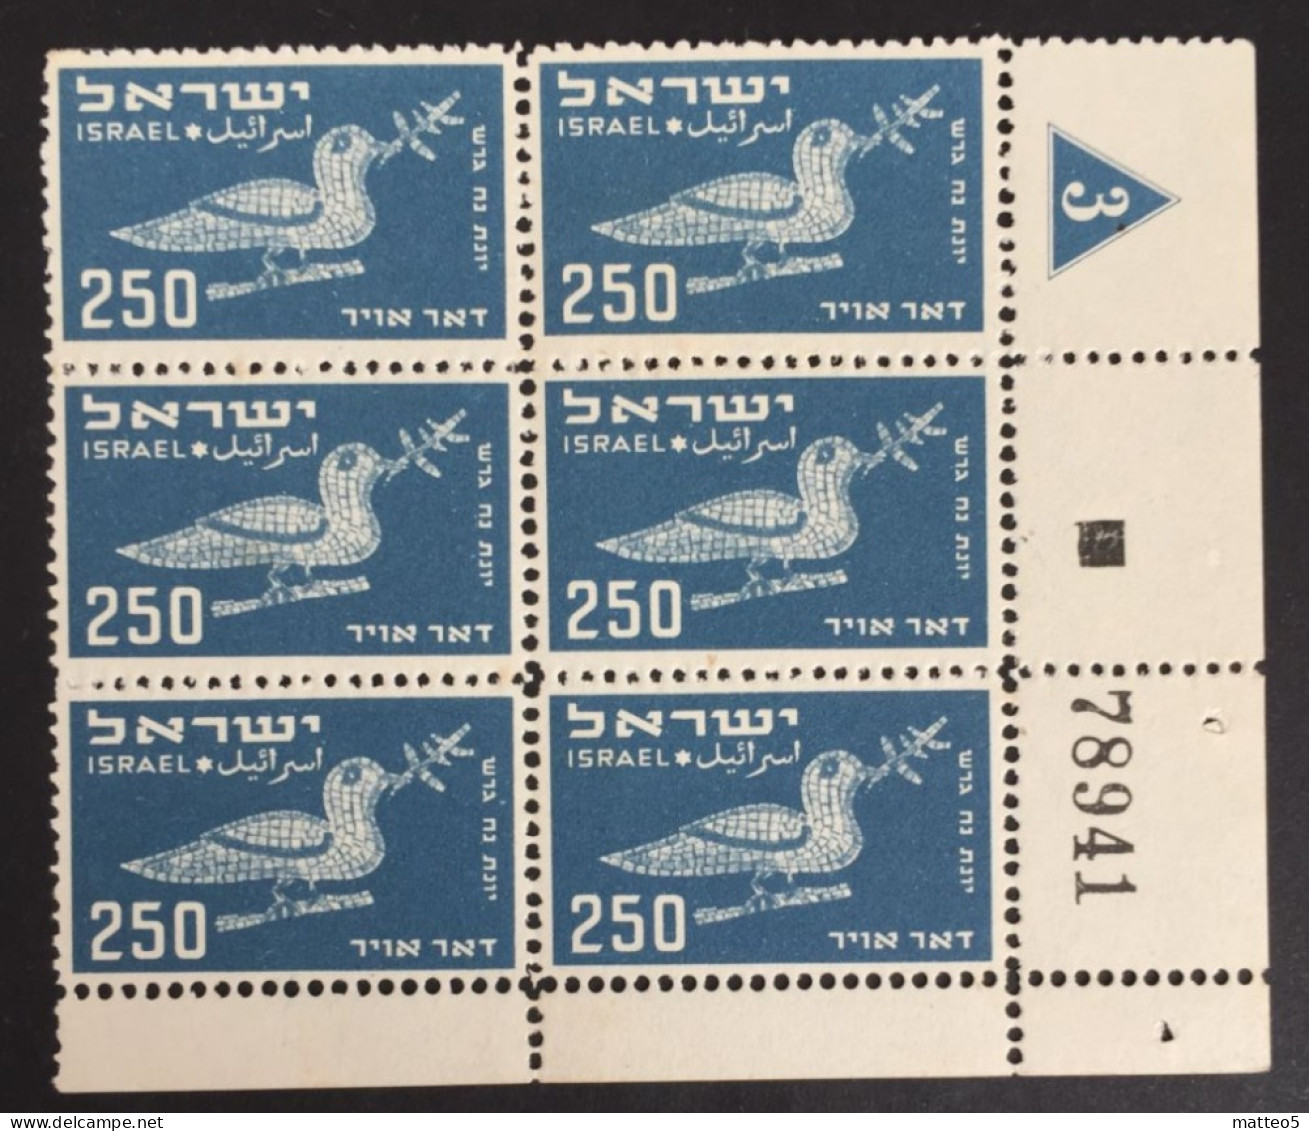 1950 Israel - Airmail - Bird Representation, Dove With Olive Branch - 6 Stamps - Unused - Ungebraucht (ohne Tabs)